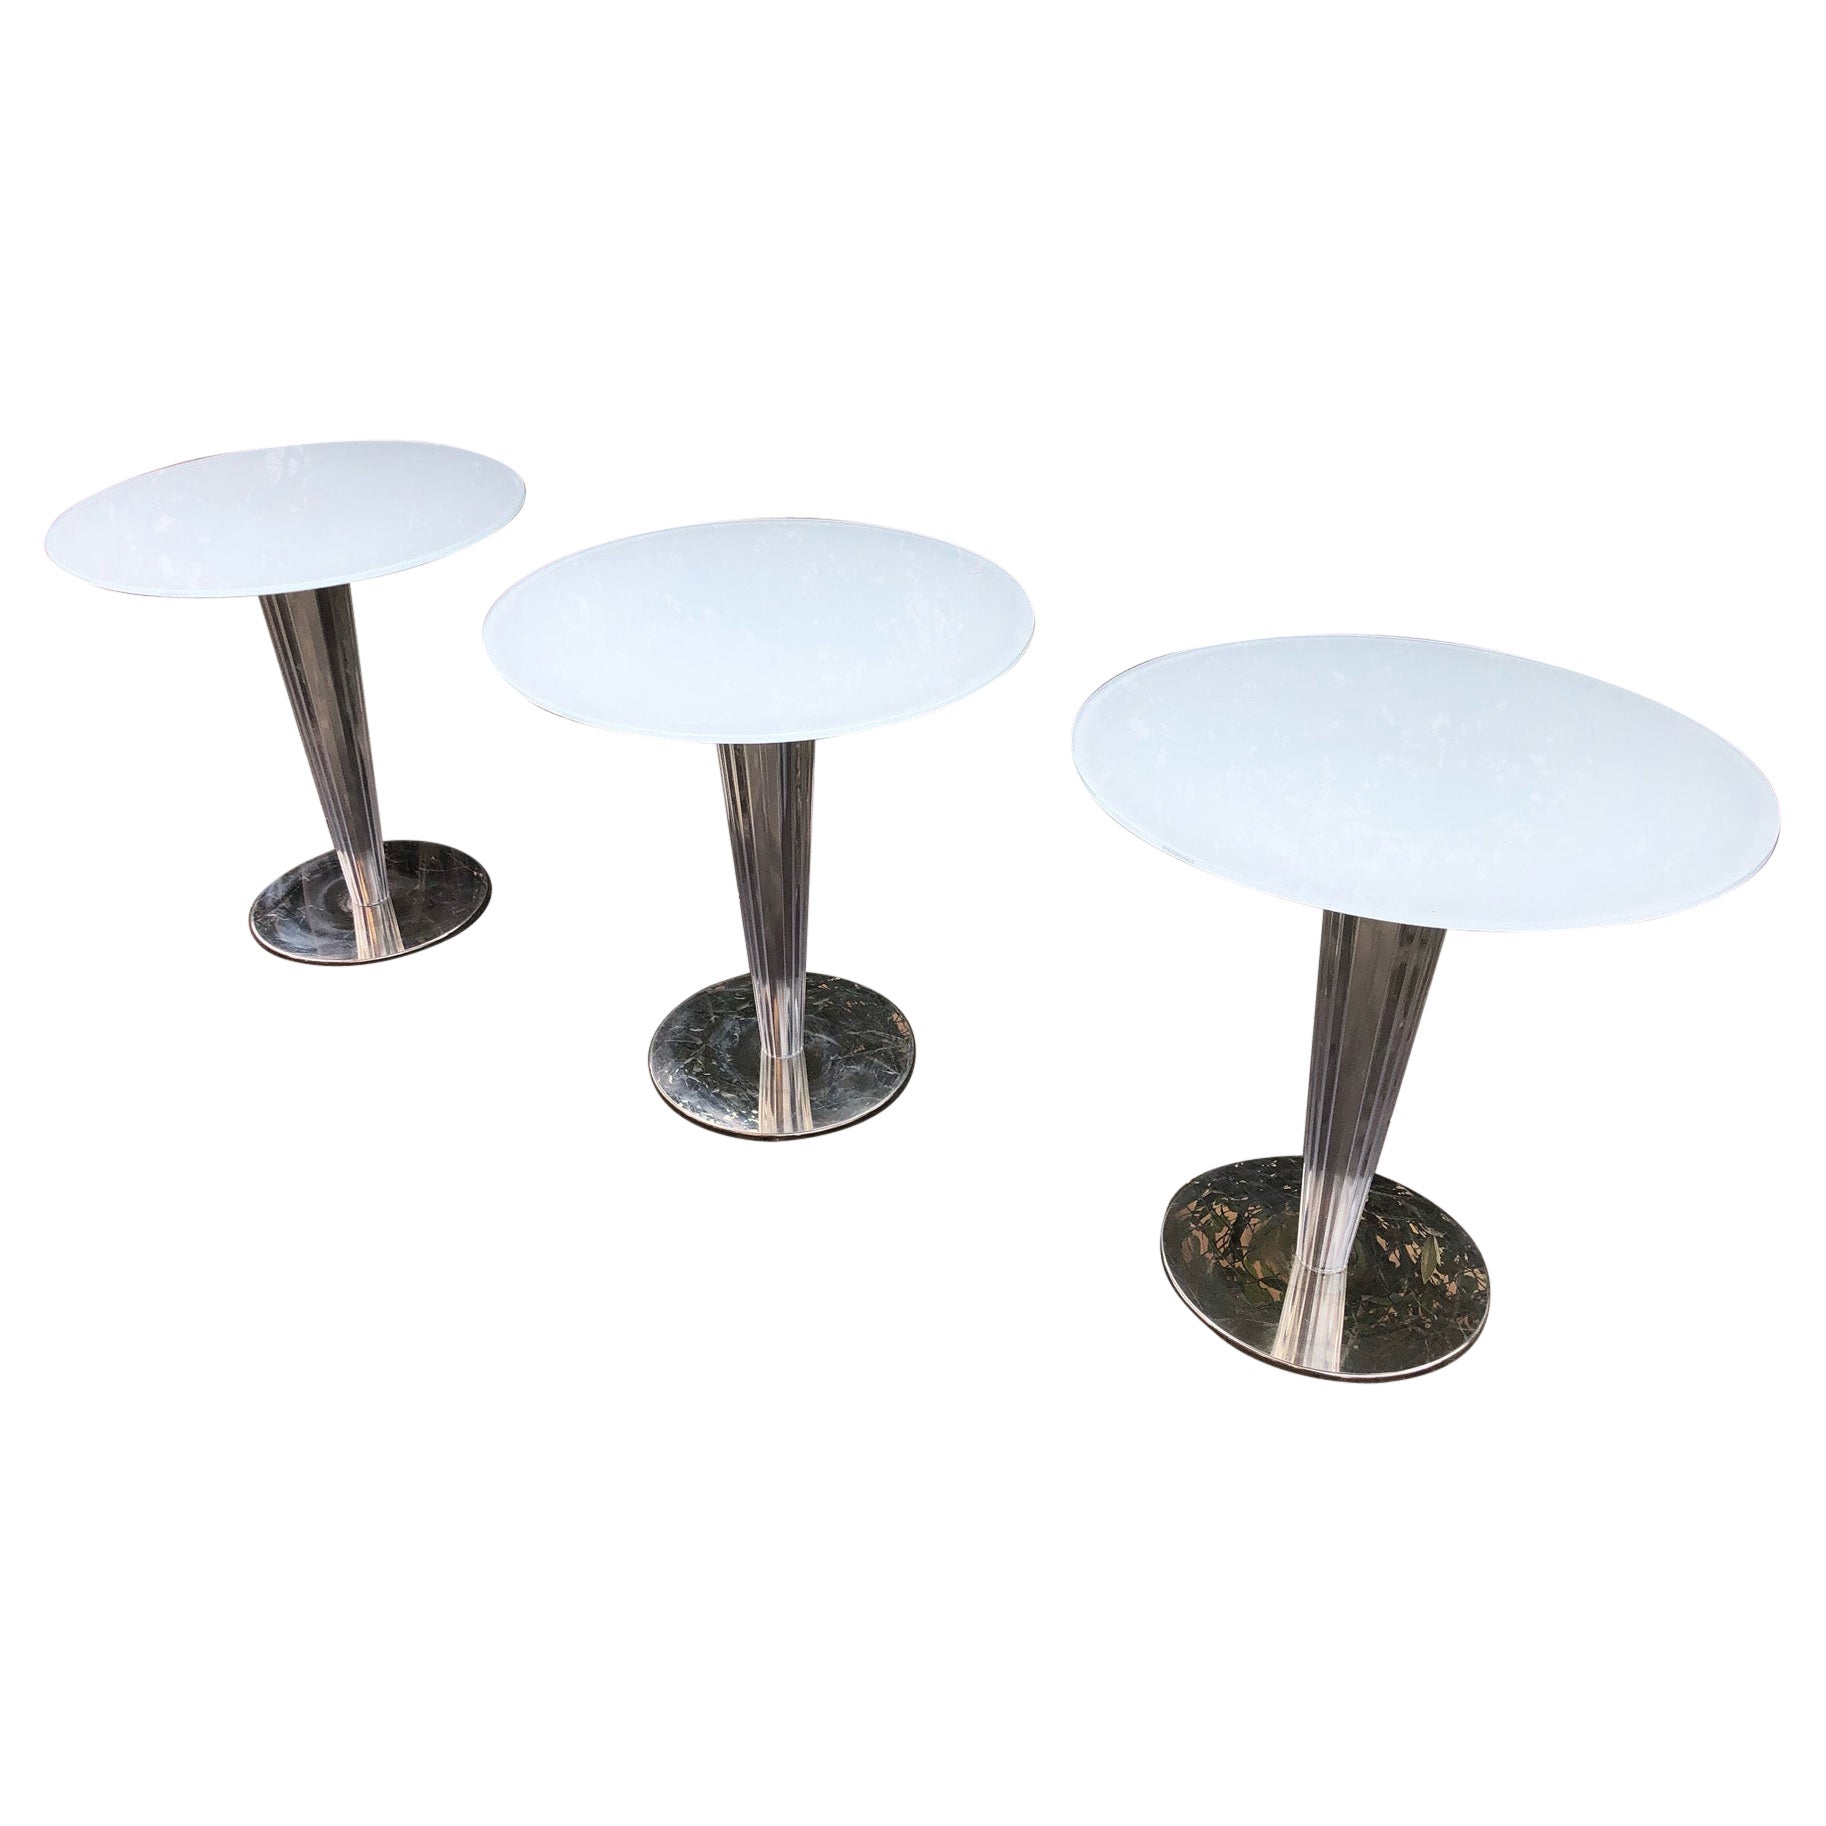 Pedrali Table from the 21st Century, Tempered Satin Glass For Sale